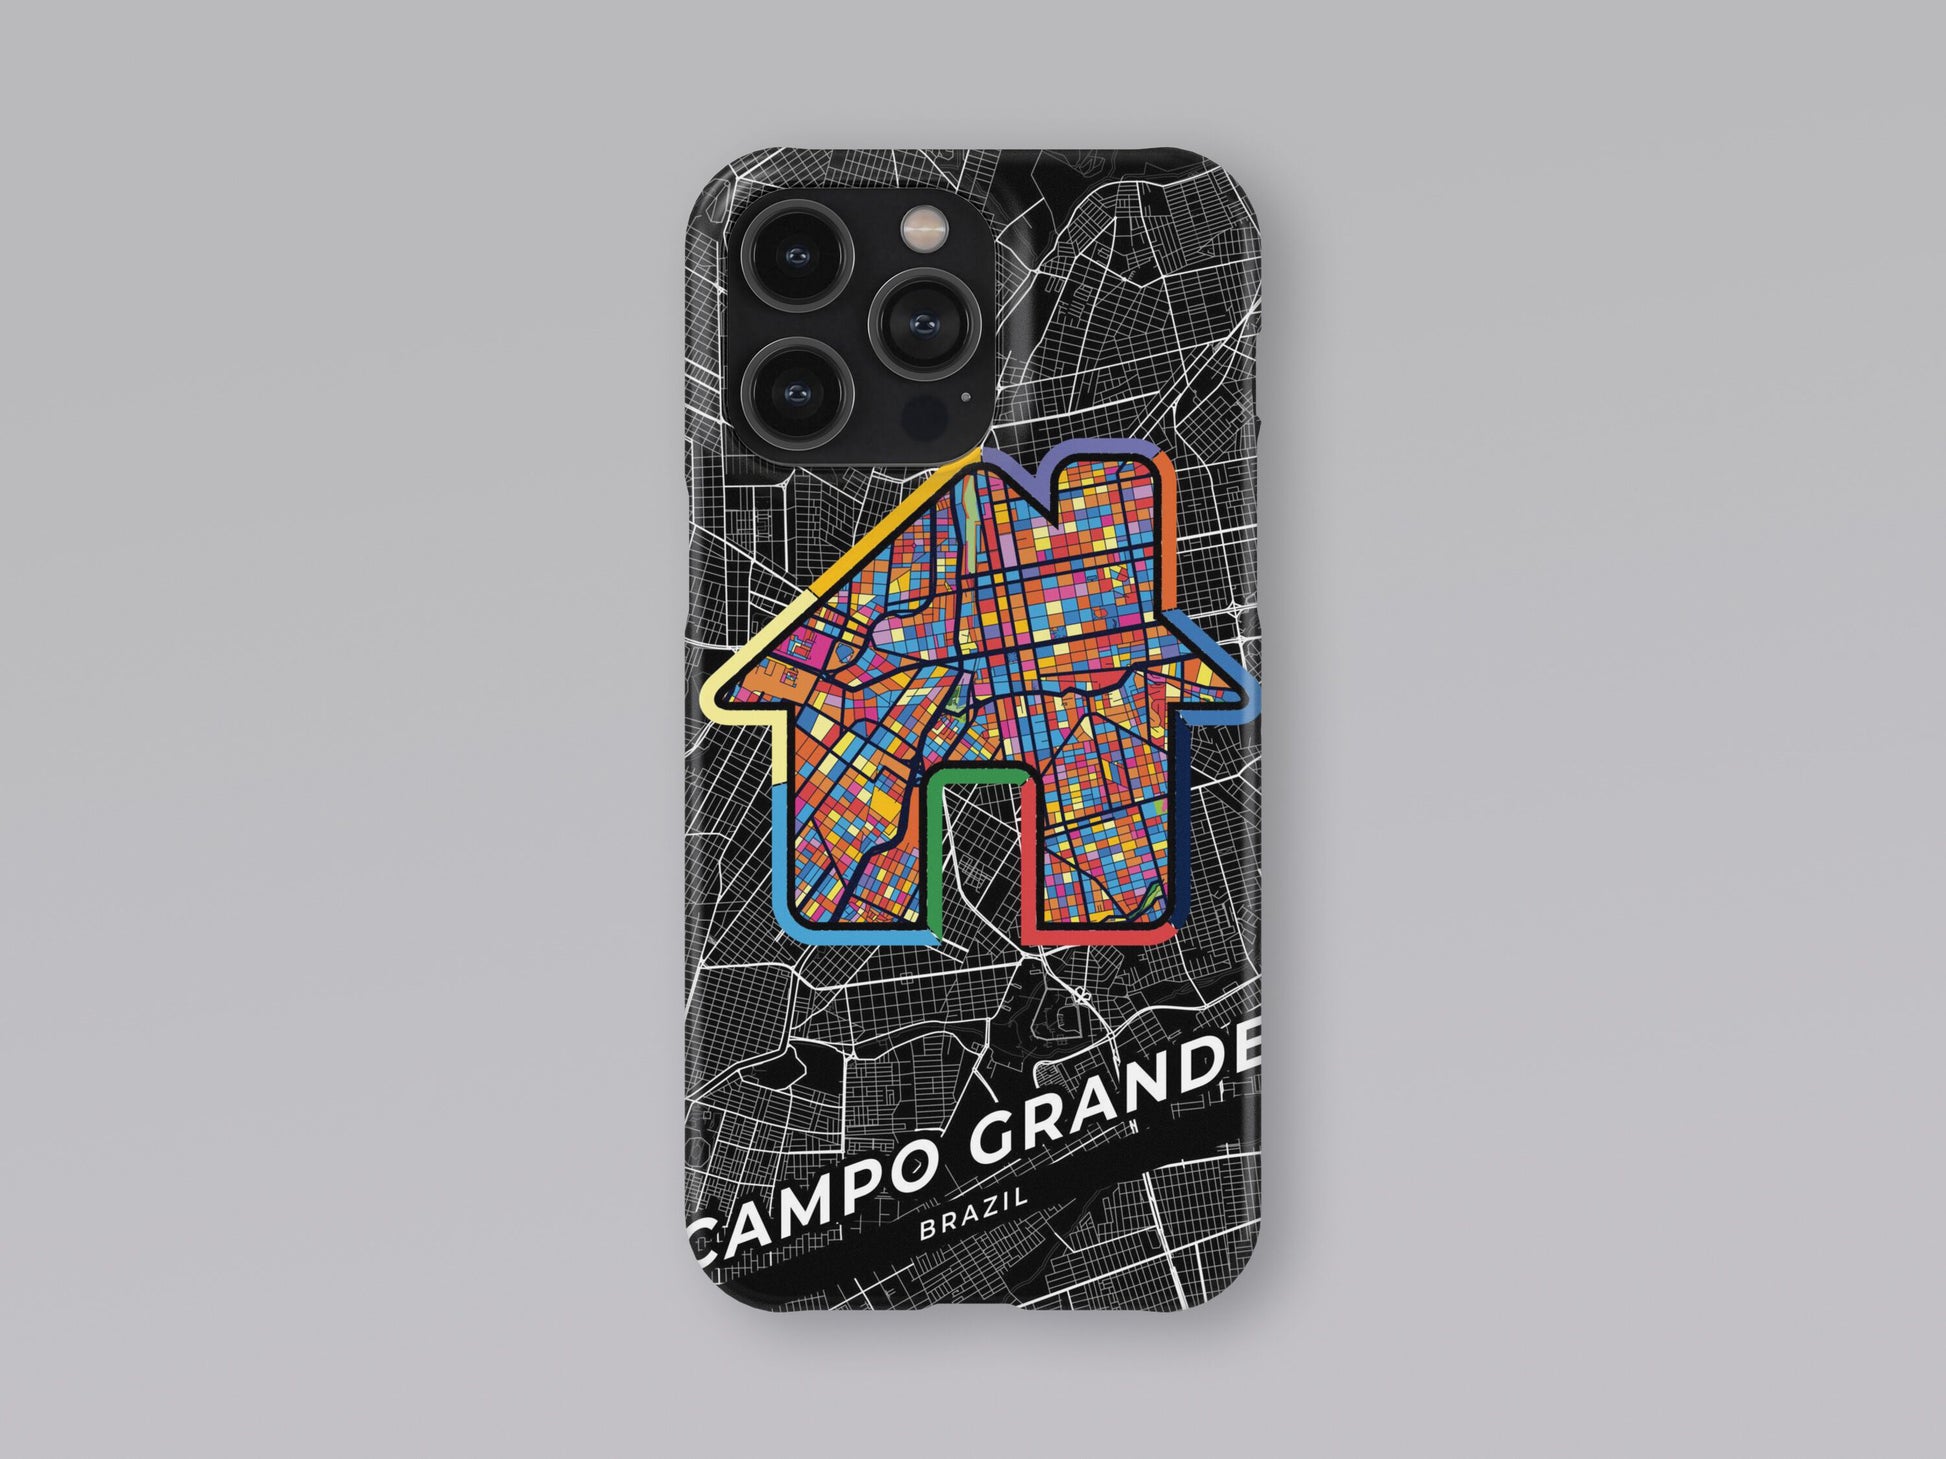 Campo Grande Brazil slim phone case with colorful icon. Birthday, wedding or housewarming gift. Couple match cases. 3